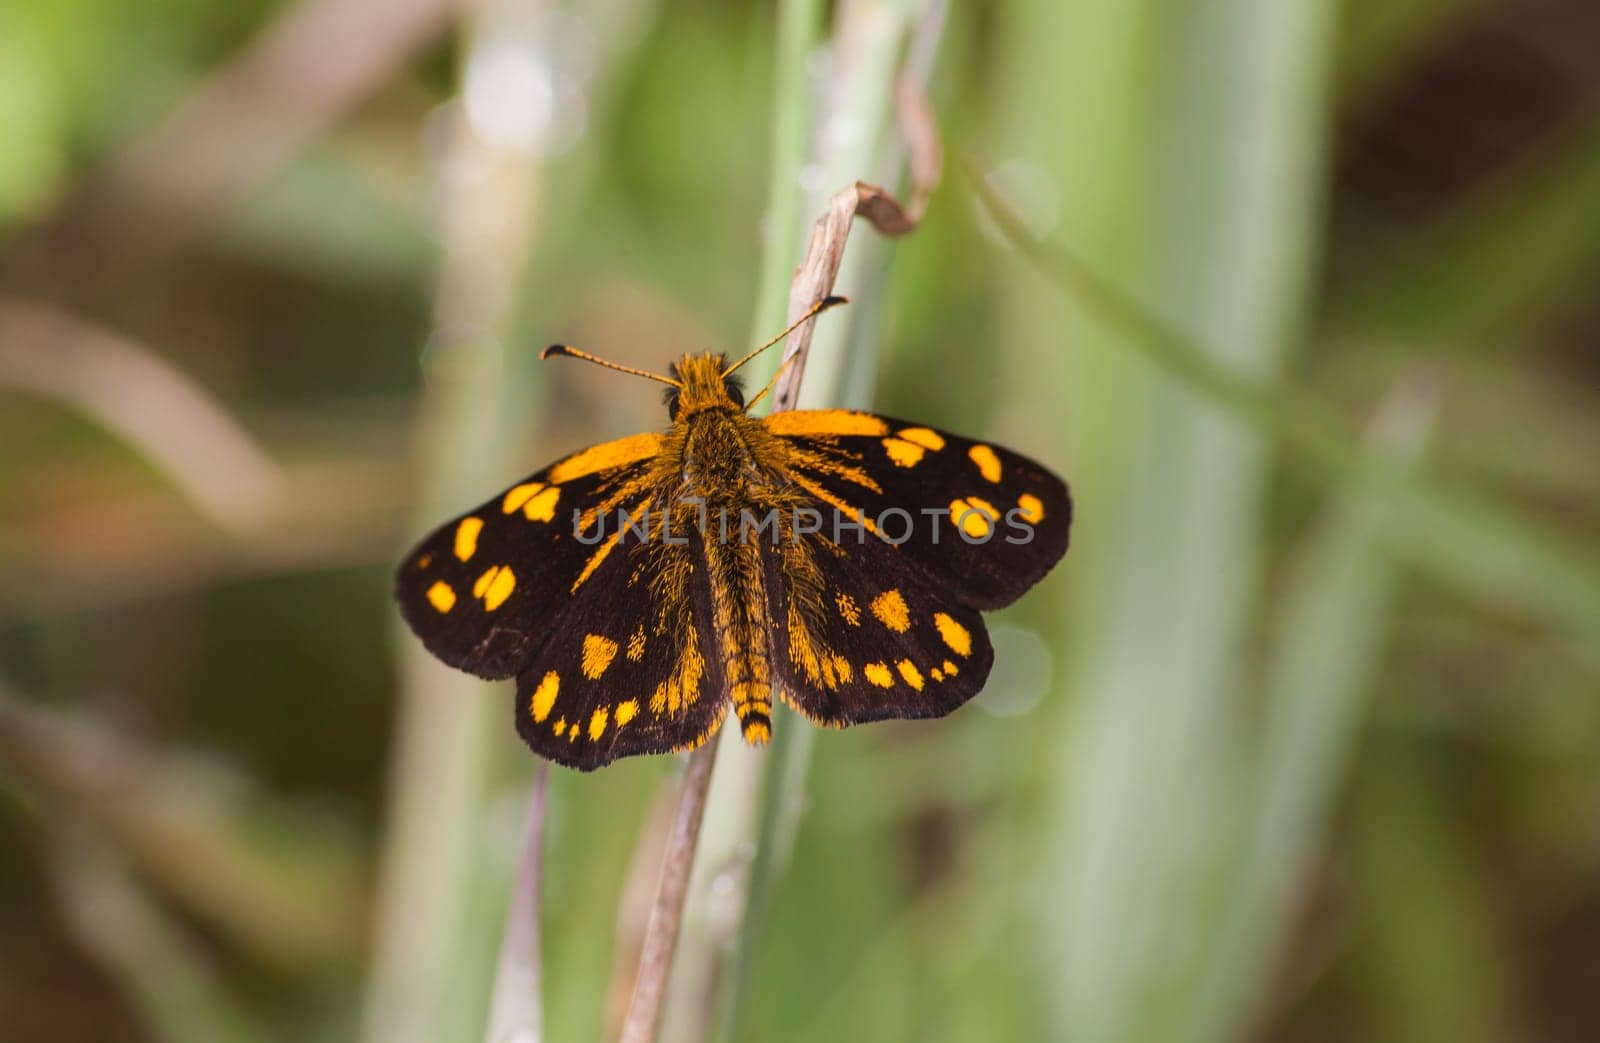 The Gold Spotted Sylph (Metisella metis) butterfly, photographed in the Magoebaskloof forest near Haenertsburg, Limpopo Province in South Africa